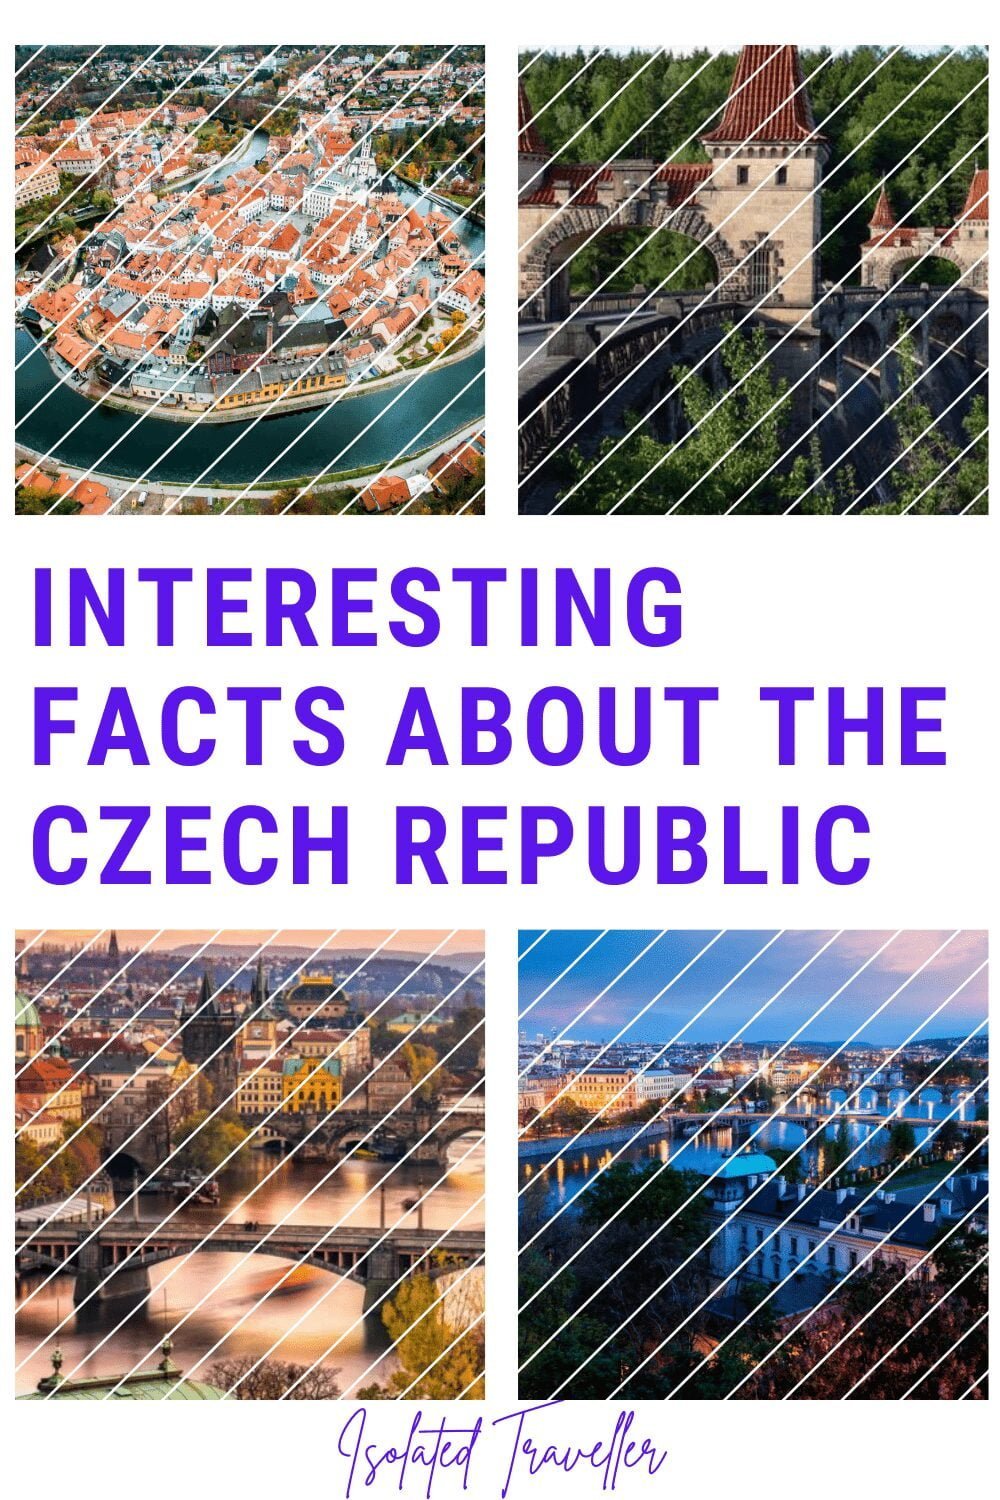 Interesting Facts About The Czechia